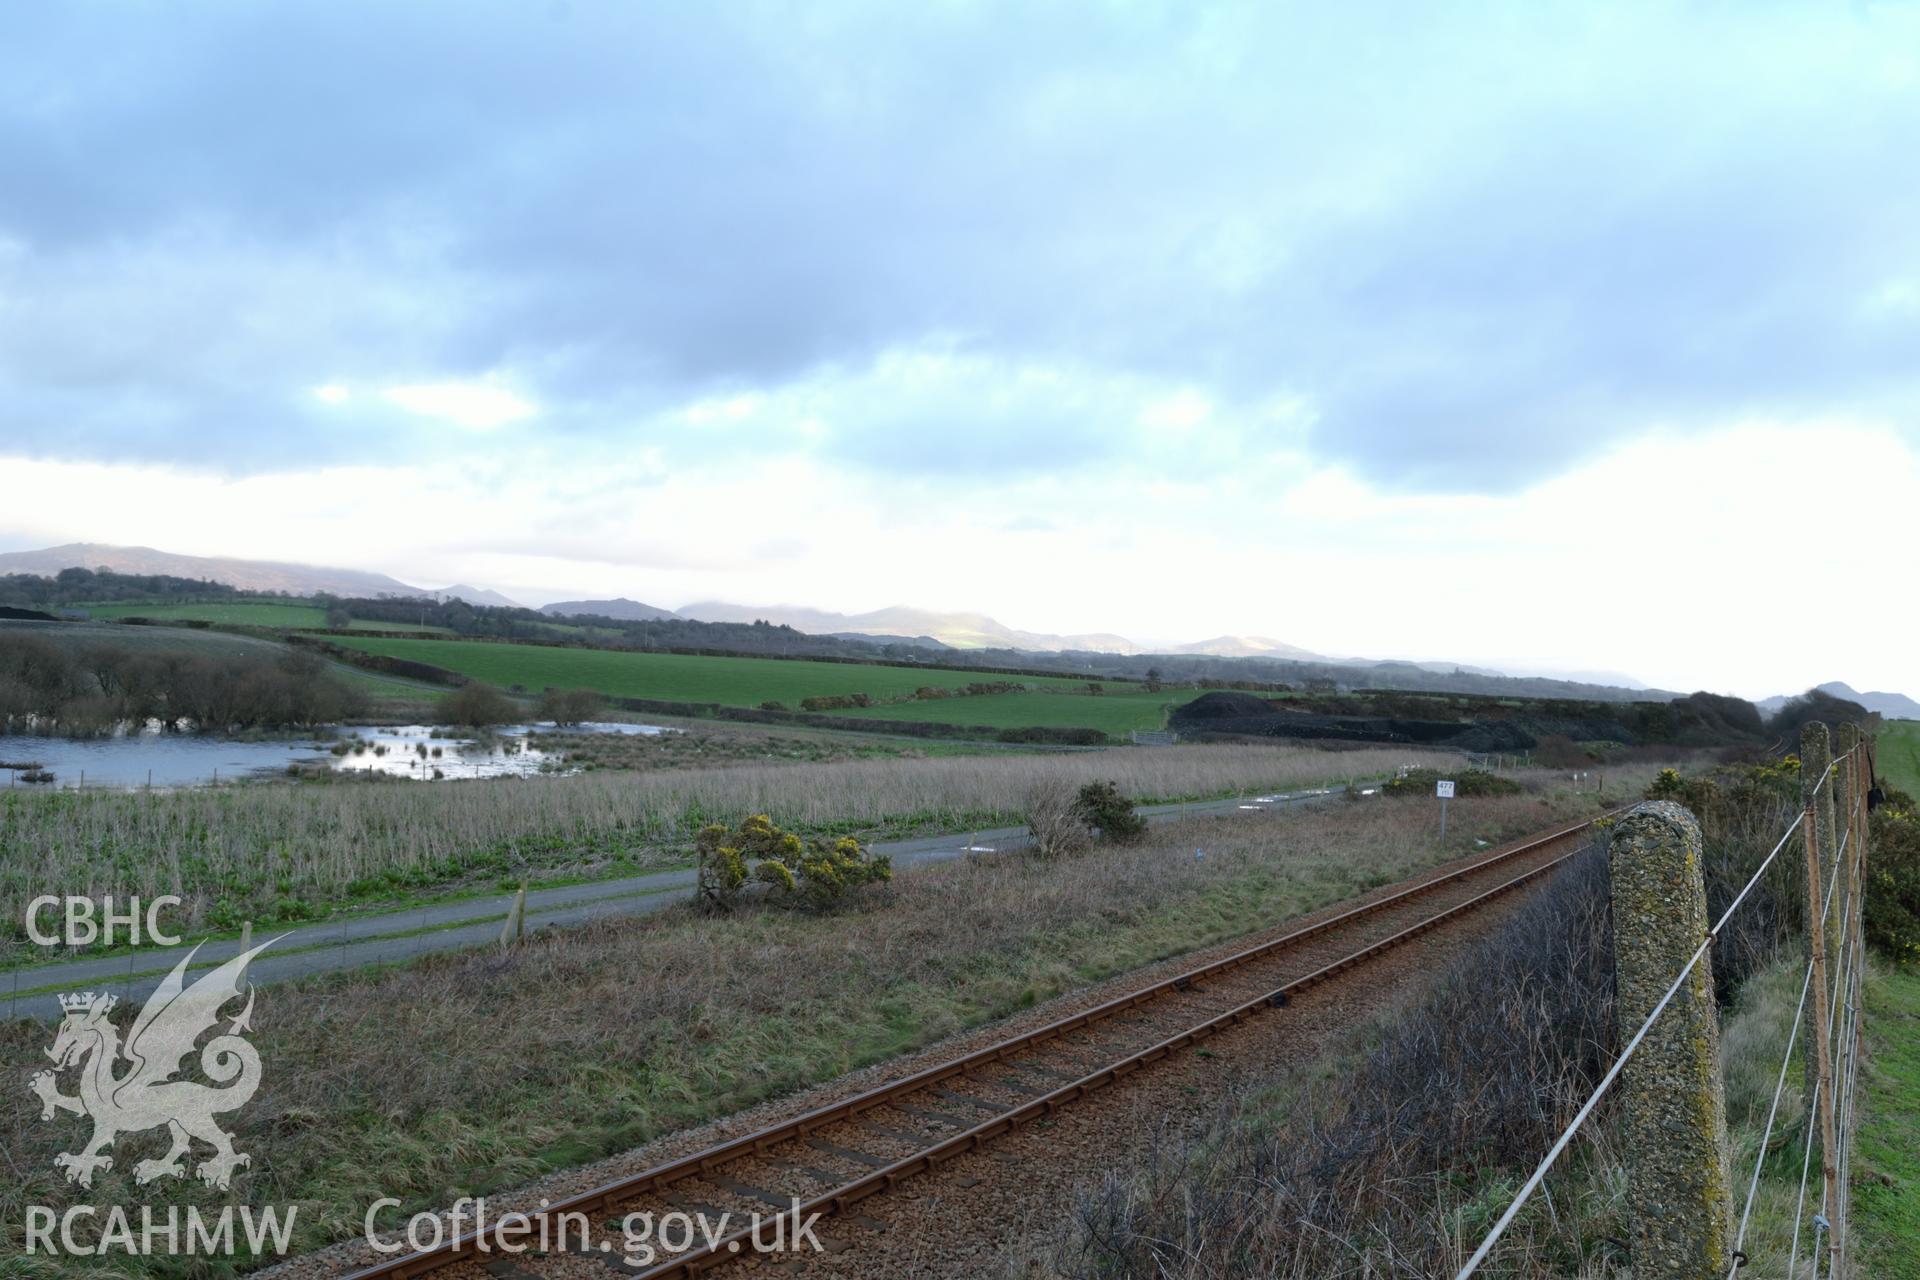 View along railway line and possible location of crane, Tomen Fawr, Llanystumdwy. Photographed by Gwynedd Archaeological Trust during impact assessment of the site on 20th December 2018. Project no. G2564.